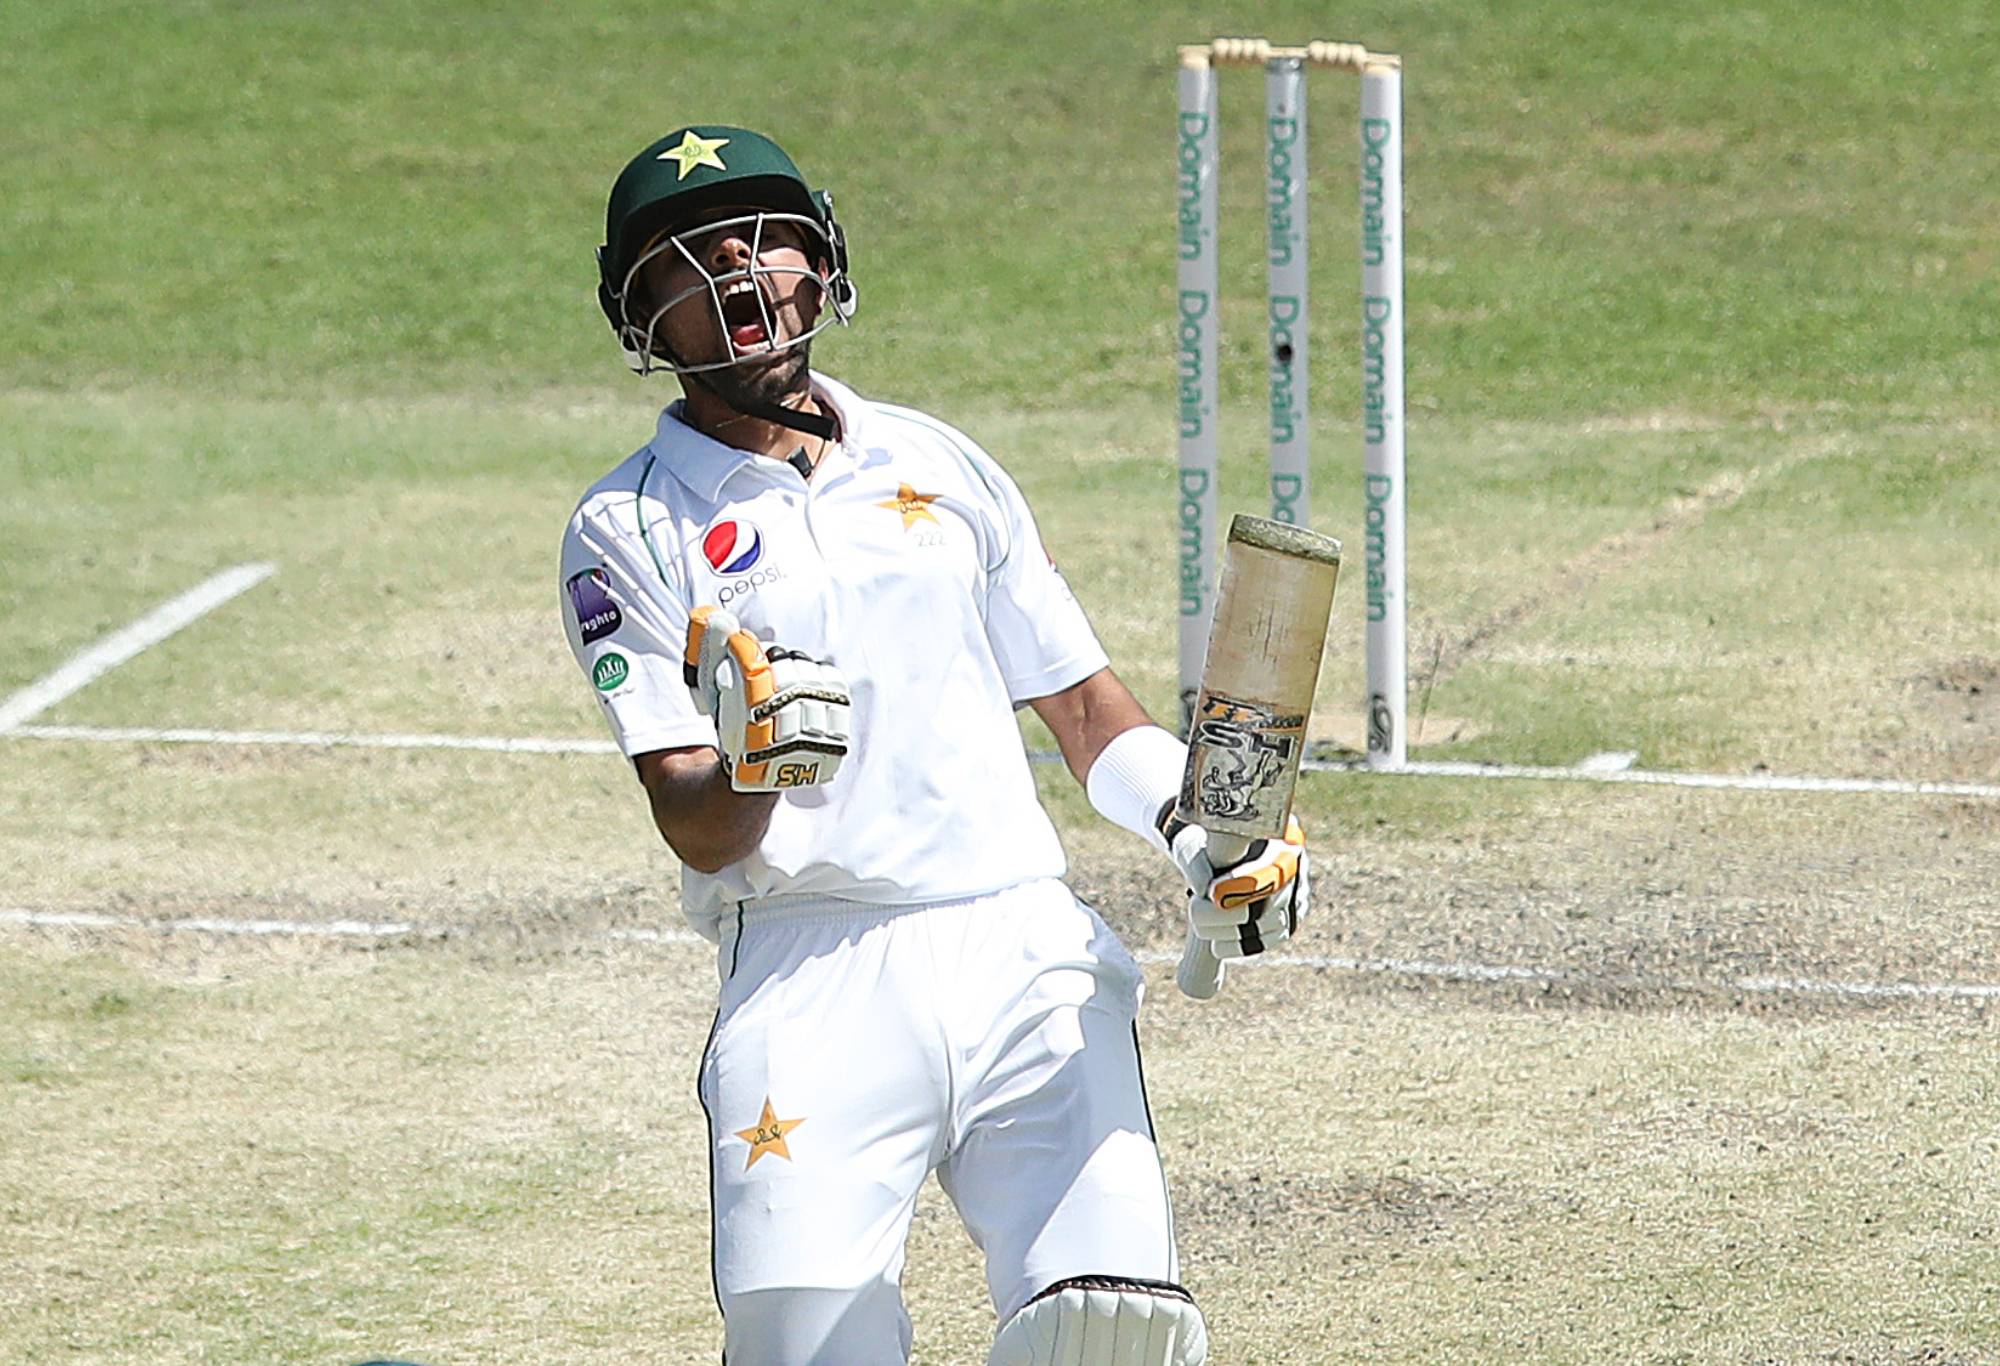 Babar Azam of Pakistan celebrates a century during day four of the 1st Domain Test between Australia and Pakistan at The Gabba on November 24, 2019 in Brisbane, Australia. (Photo by Jono Searle - CA/Cricket Australia via Getty Images)